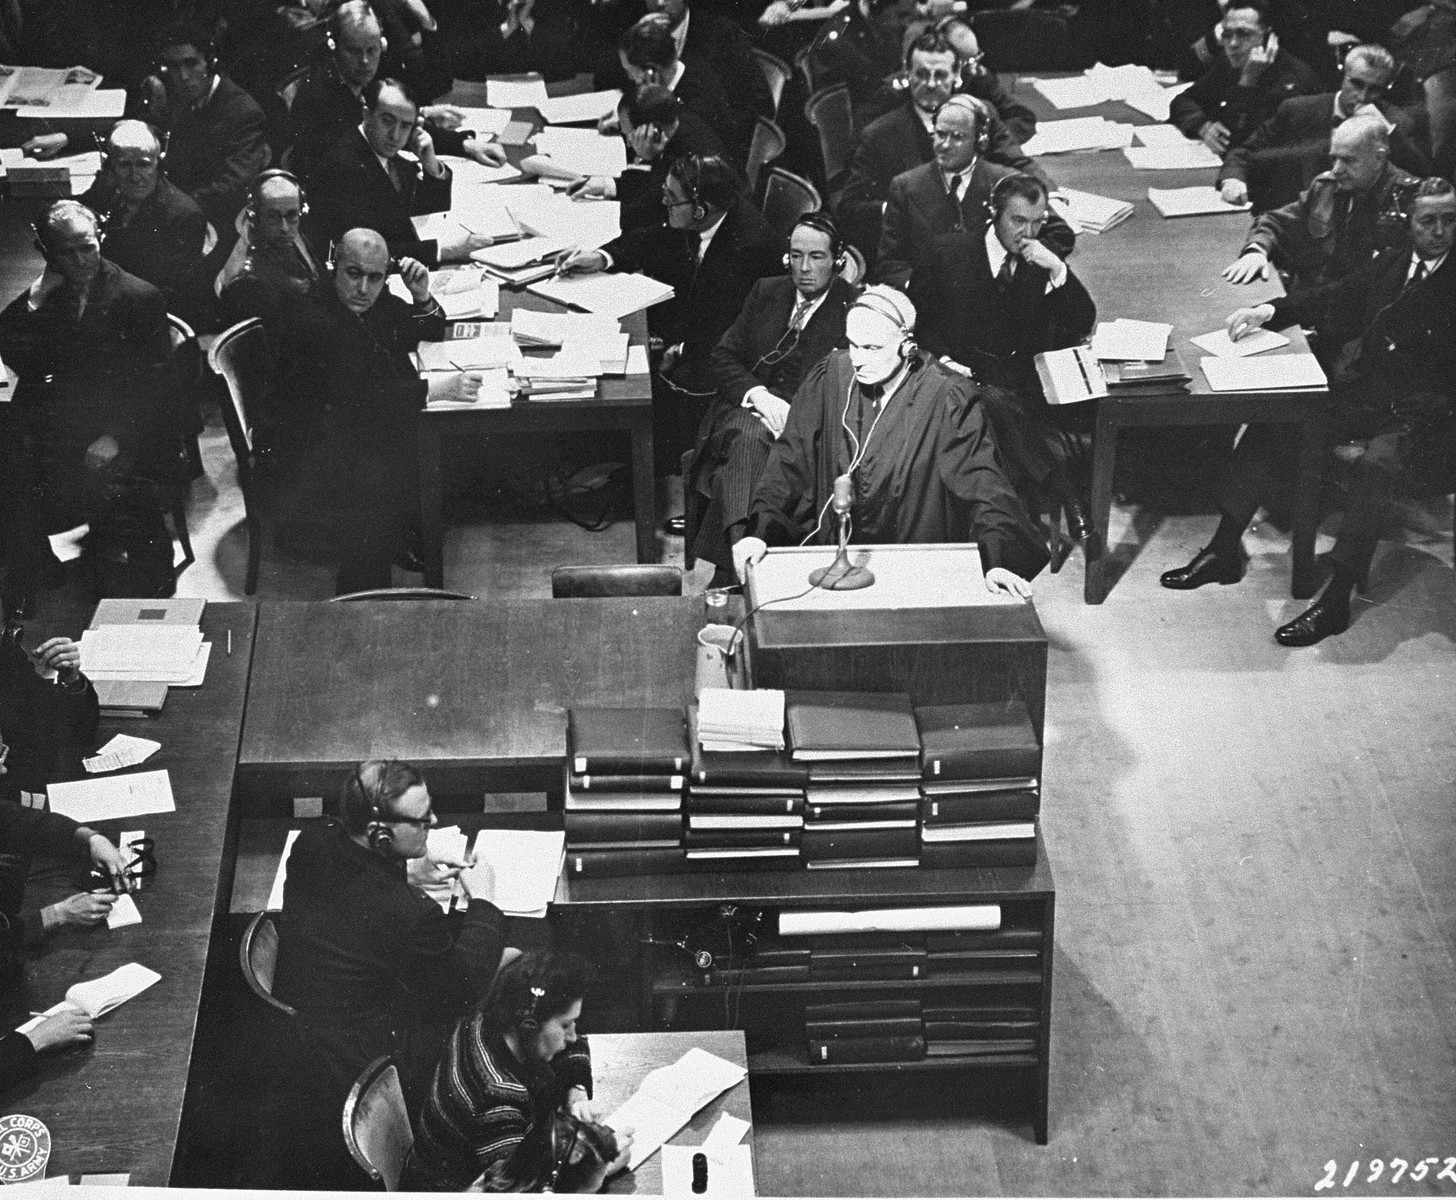 Defense attorney Dr. Otto Stahmer, the counsel for Hermann Goering, asks for a temporary adjournment so the defendants can speak with their counsellors at the International Military Tribunal trial of war criminals at Nuremberg.  As a result, court was adjourned for fifteen minutes.